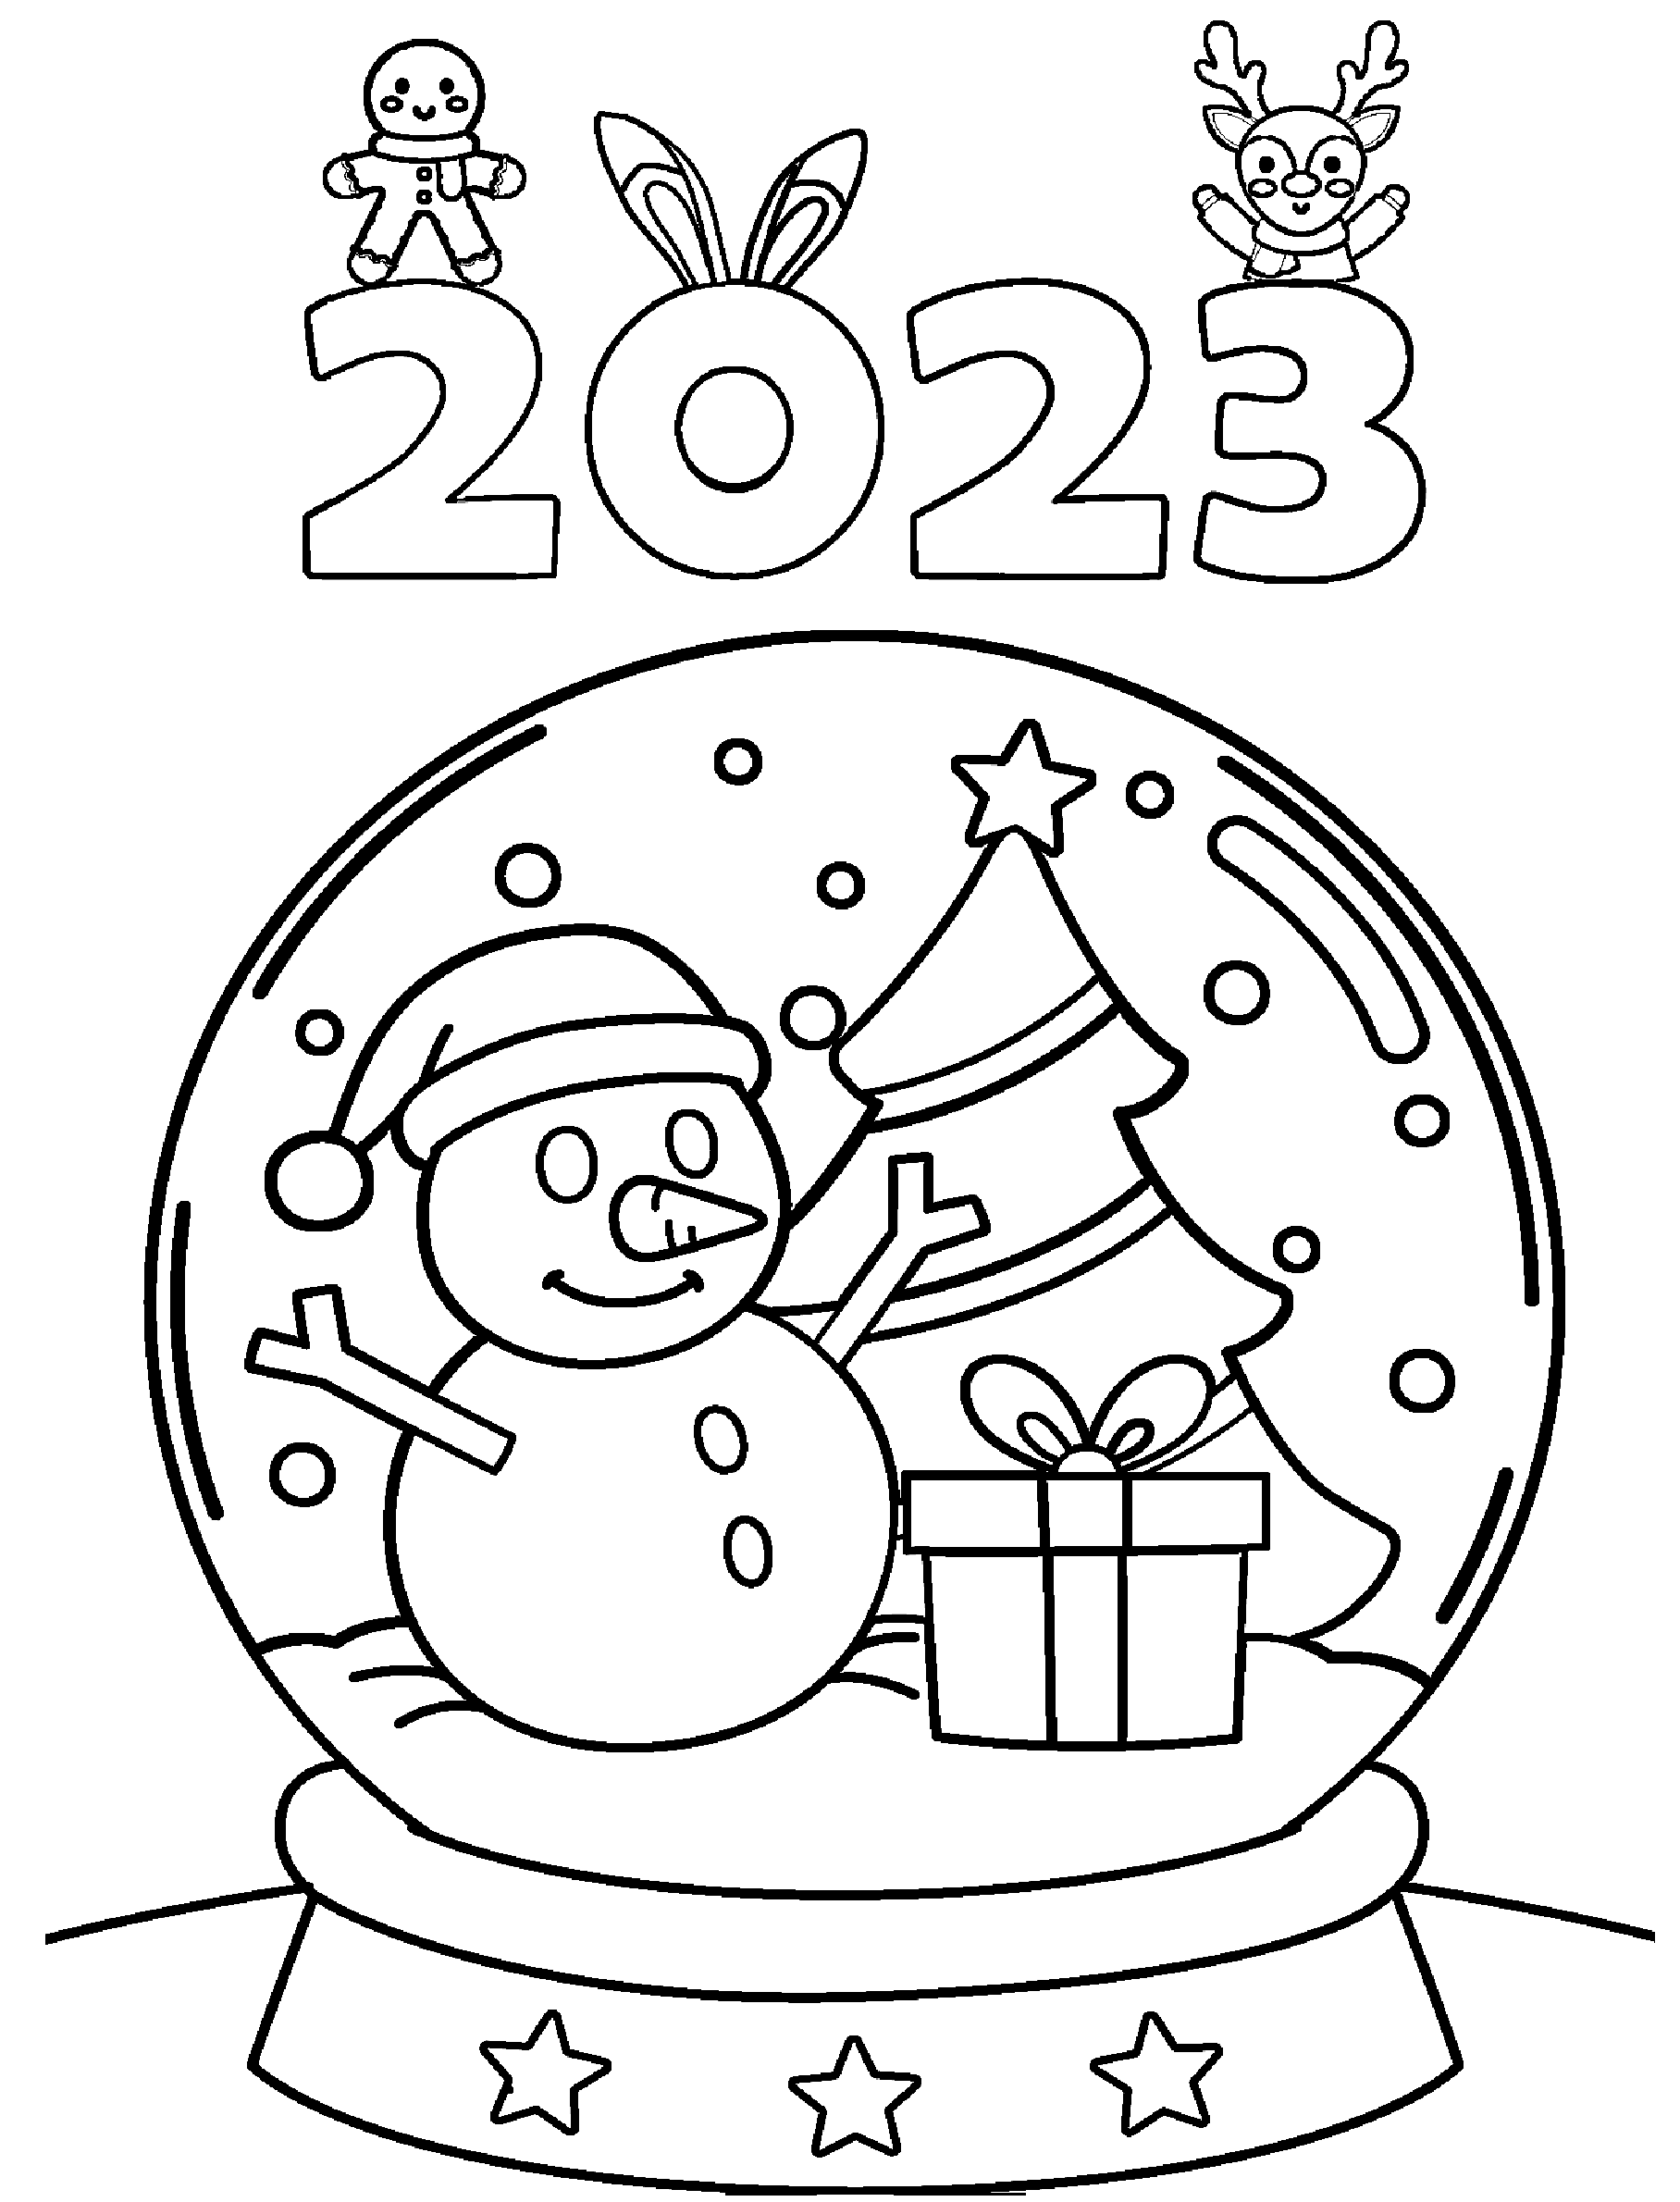 Merry Christmas 2023 Coloring Pages